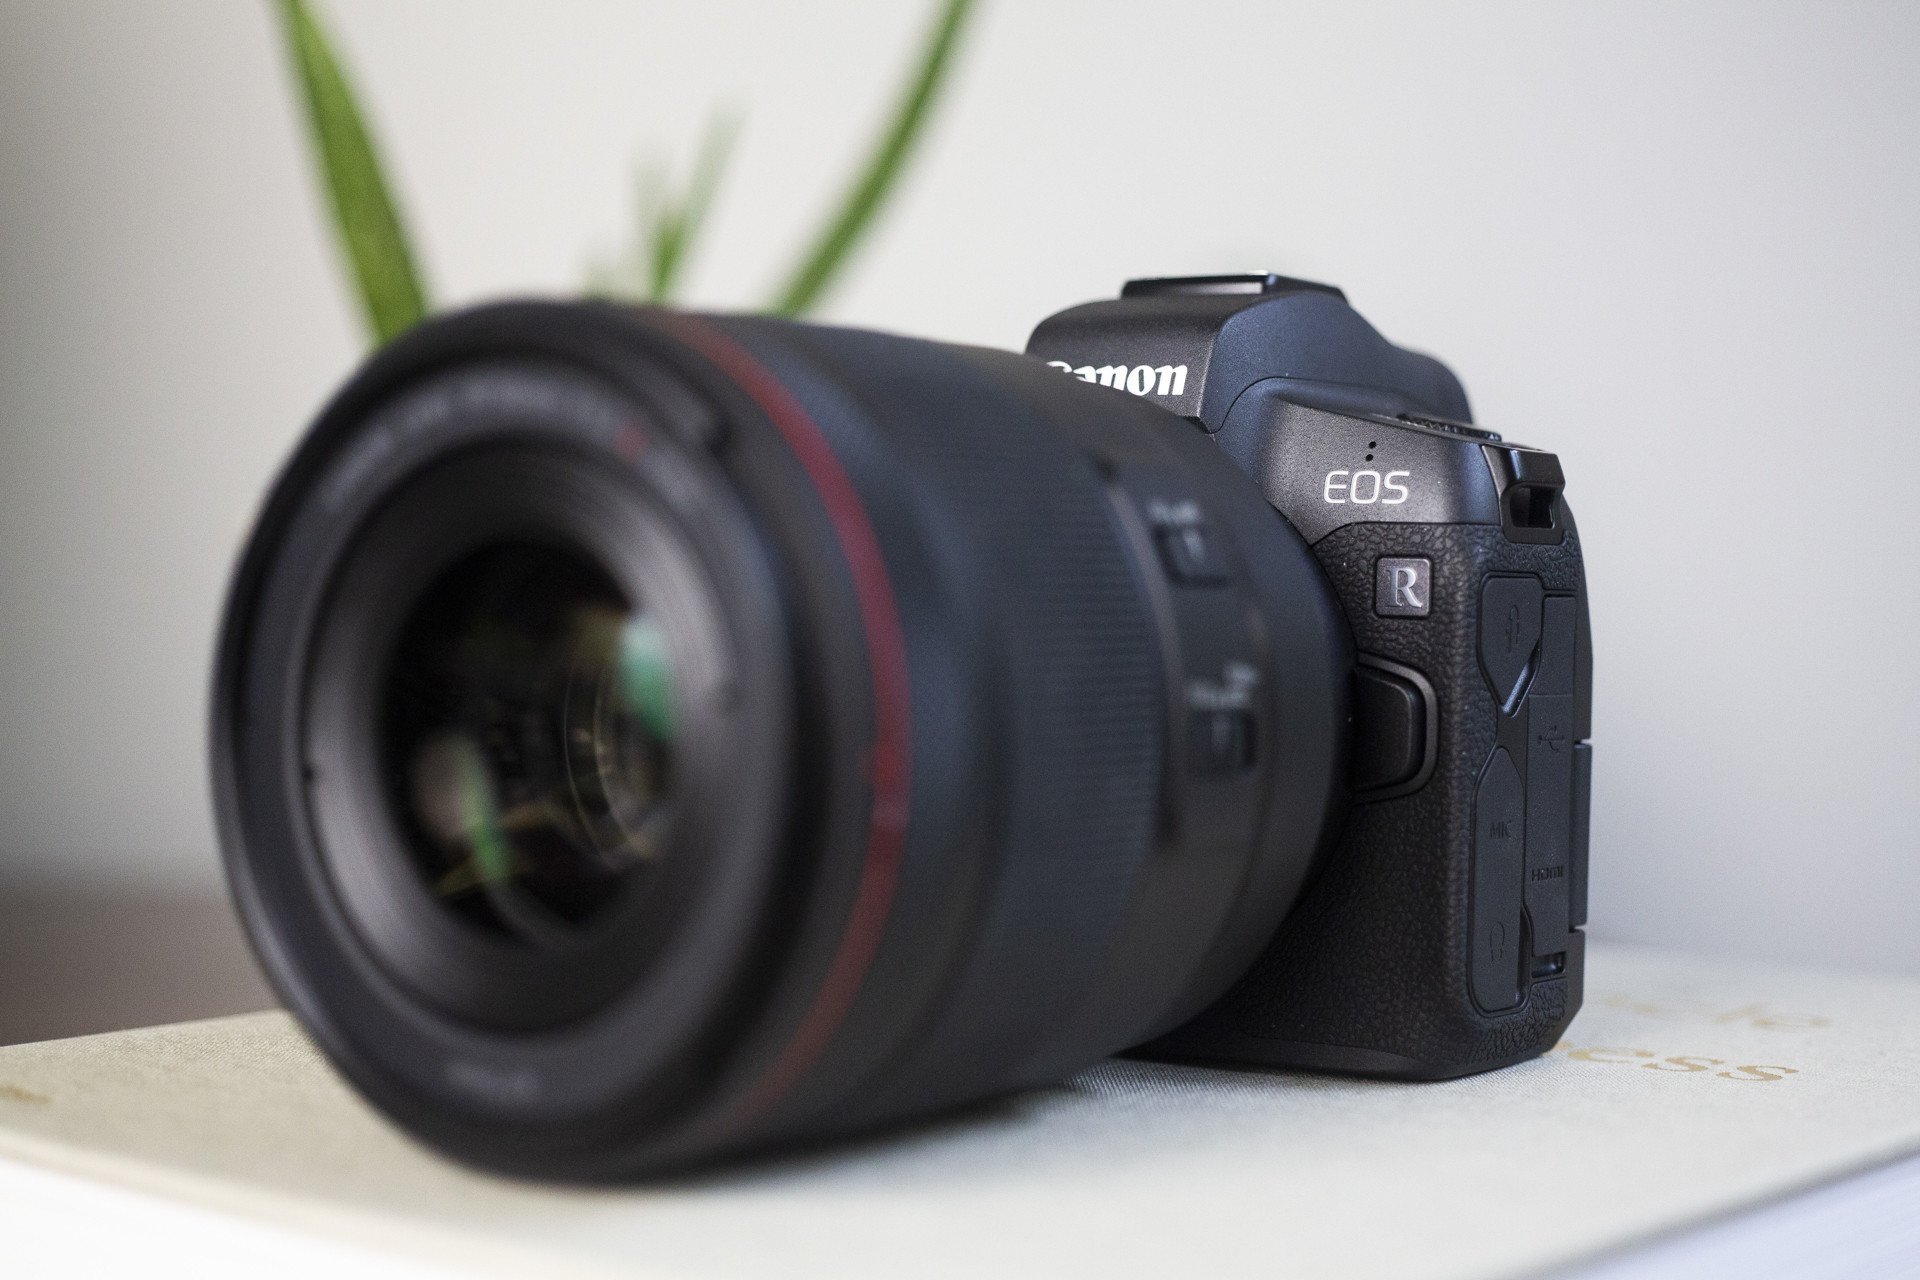 FINALLY! An Honest Canon EOS R Review, WARTS and ALL!